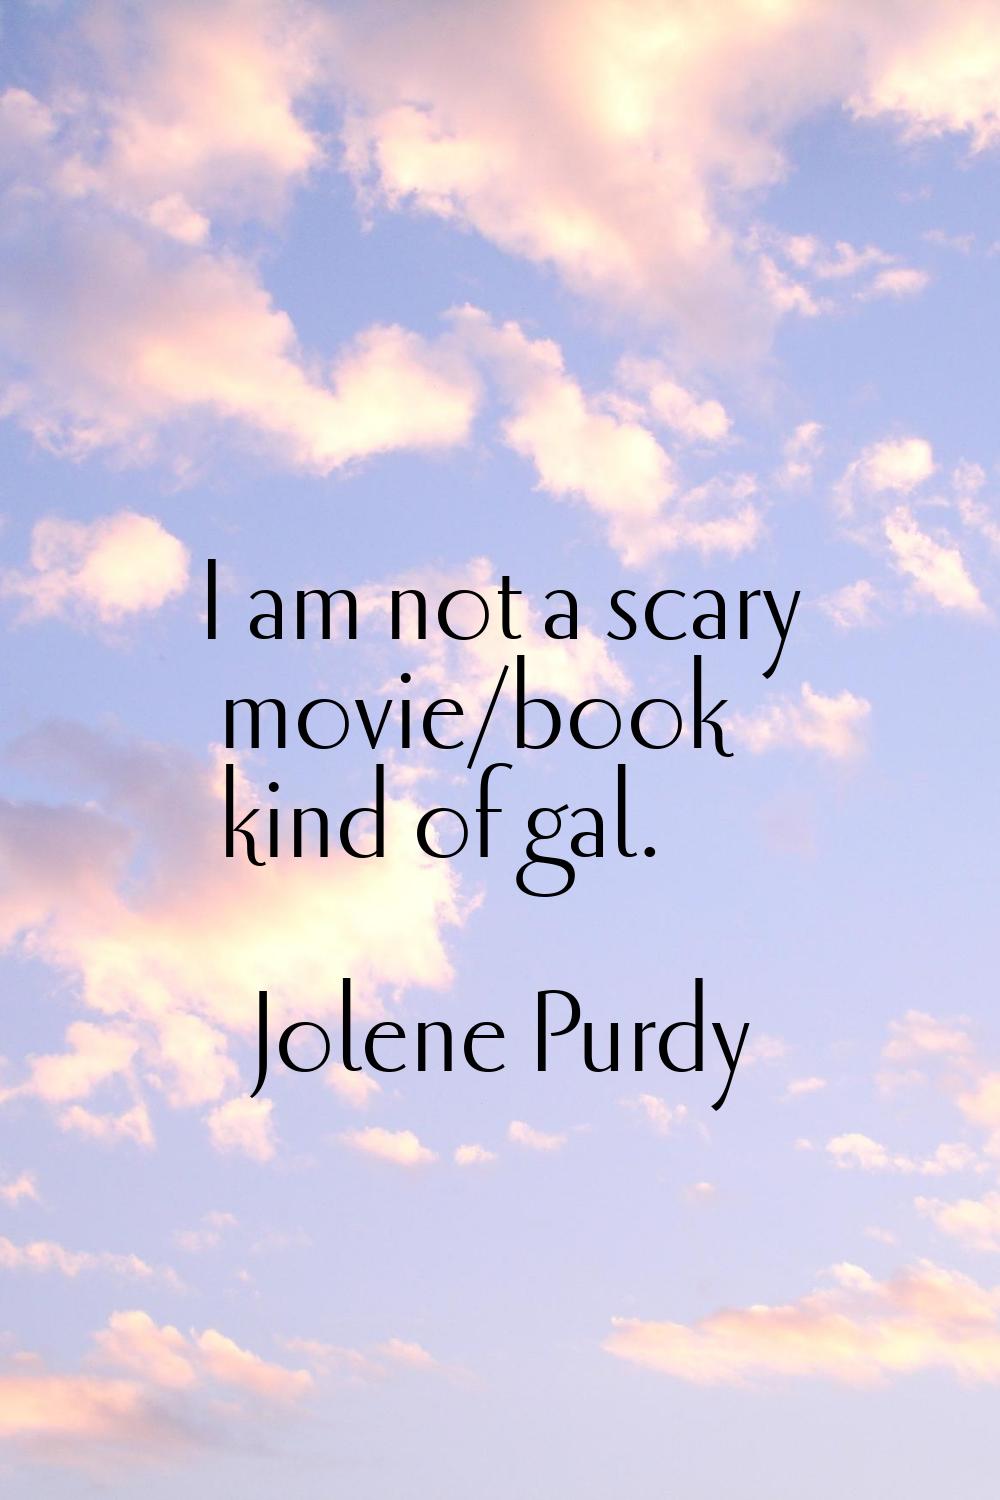 I am not a scary movie/book kind of gal.